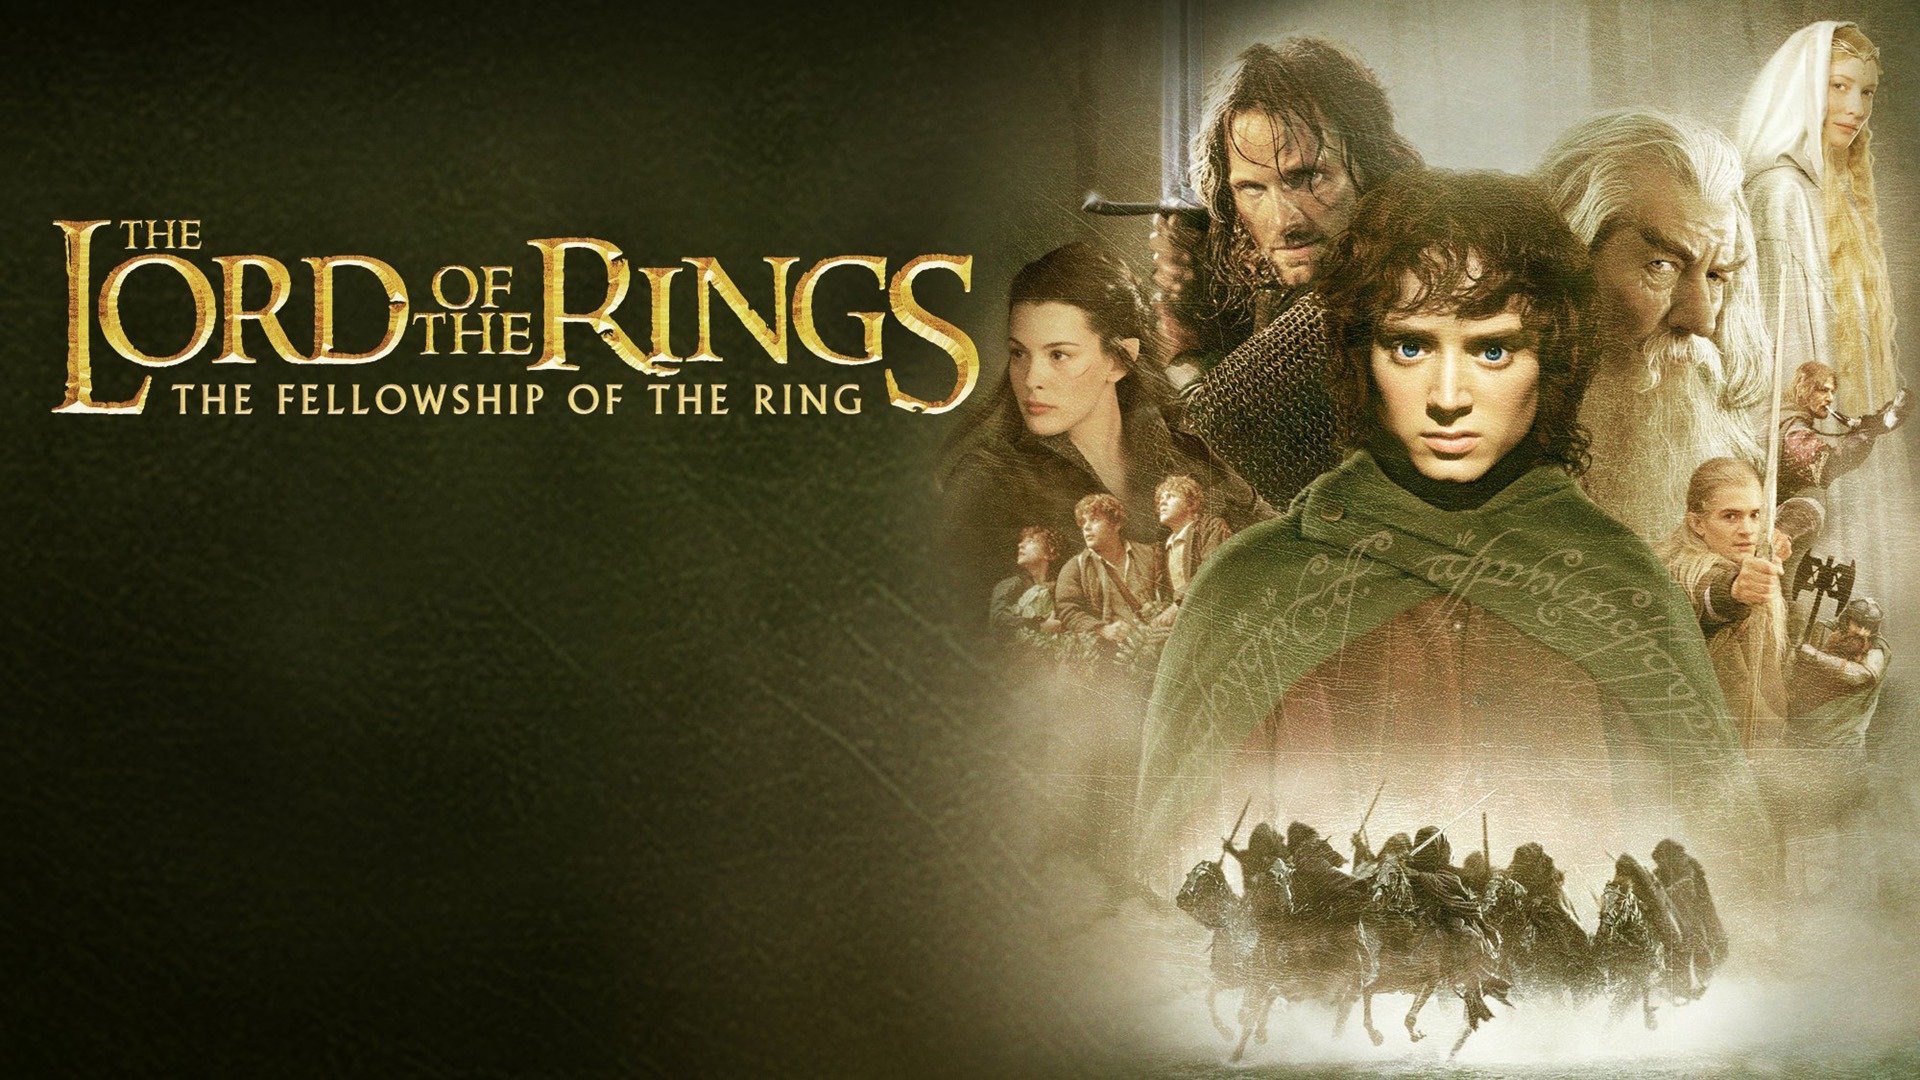 The Lord of the Rings: The Fellowship... download the new version